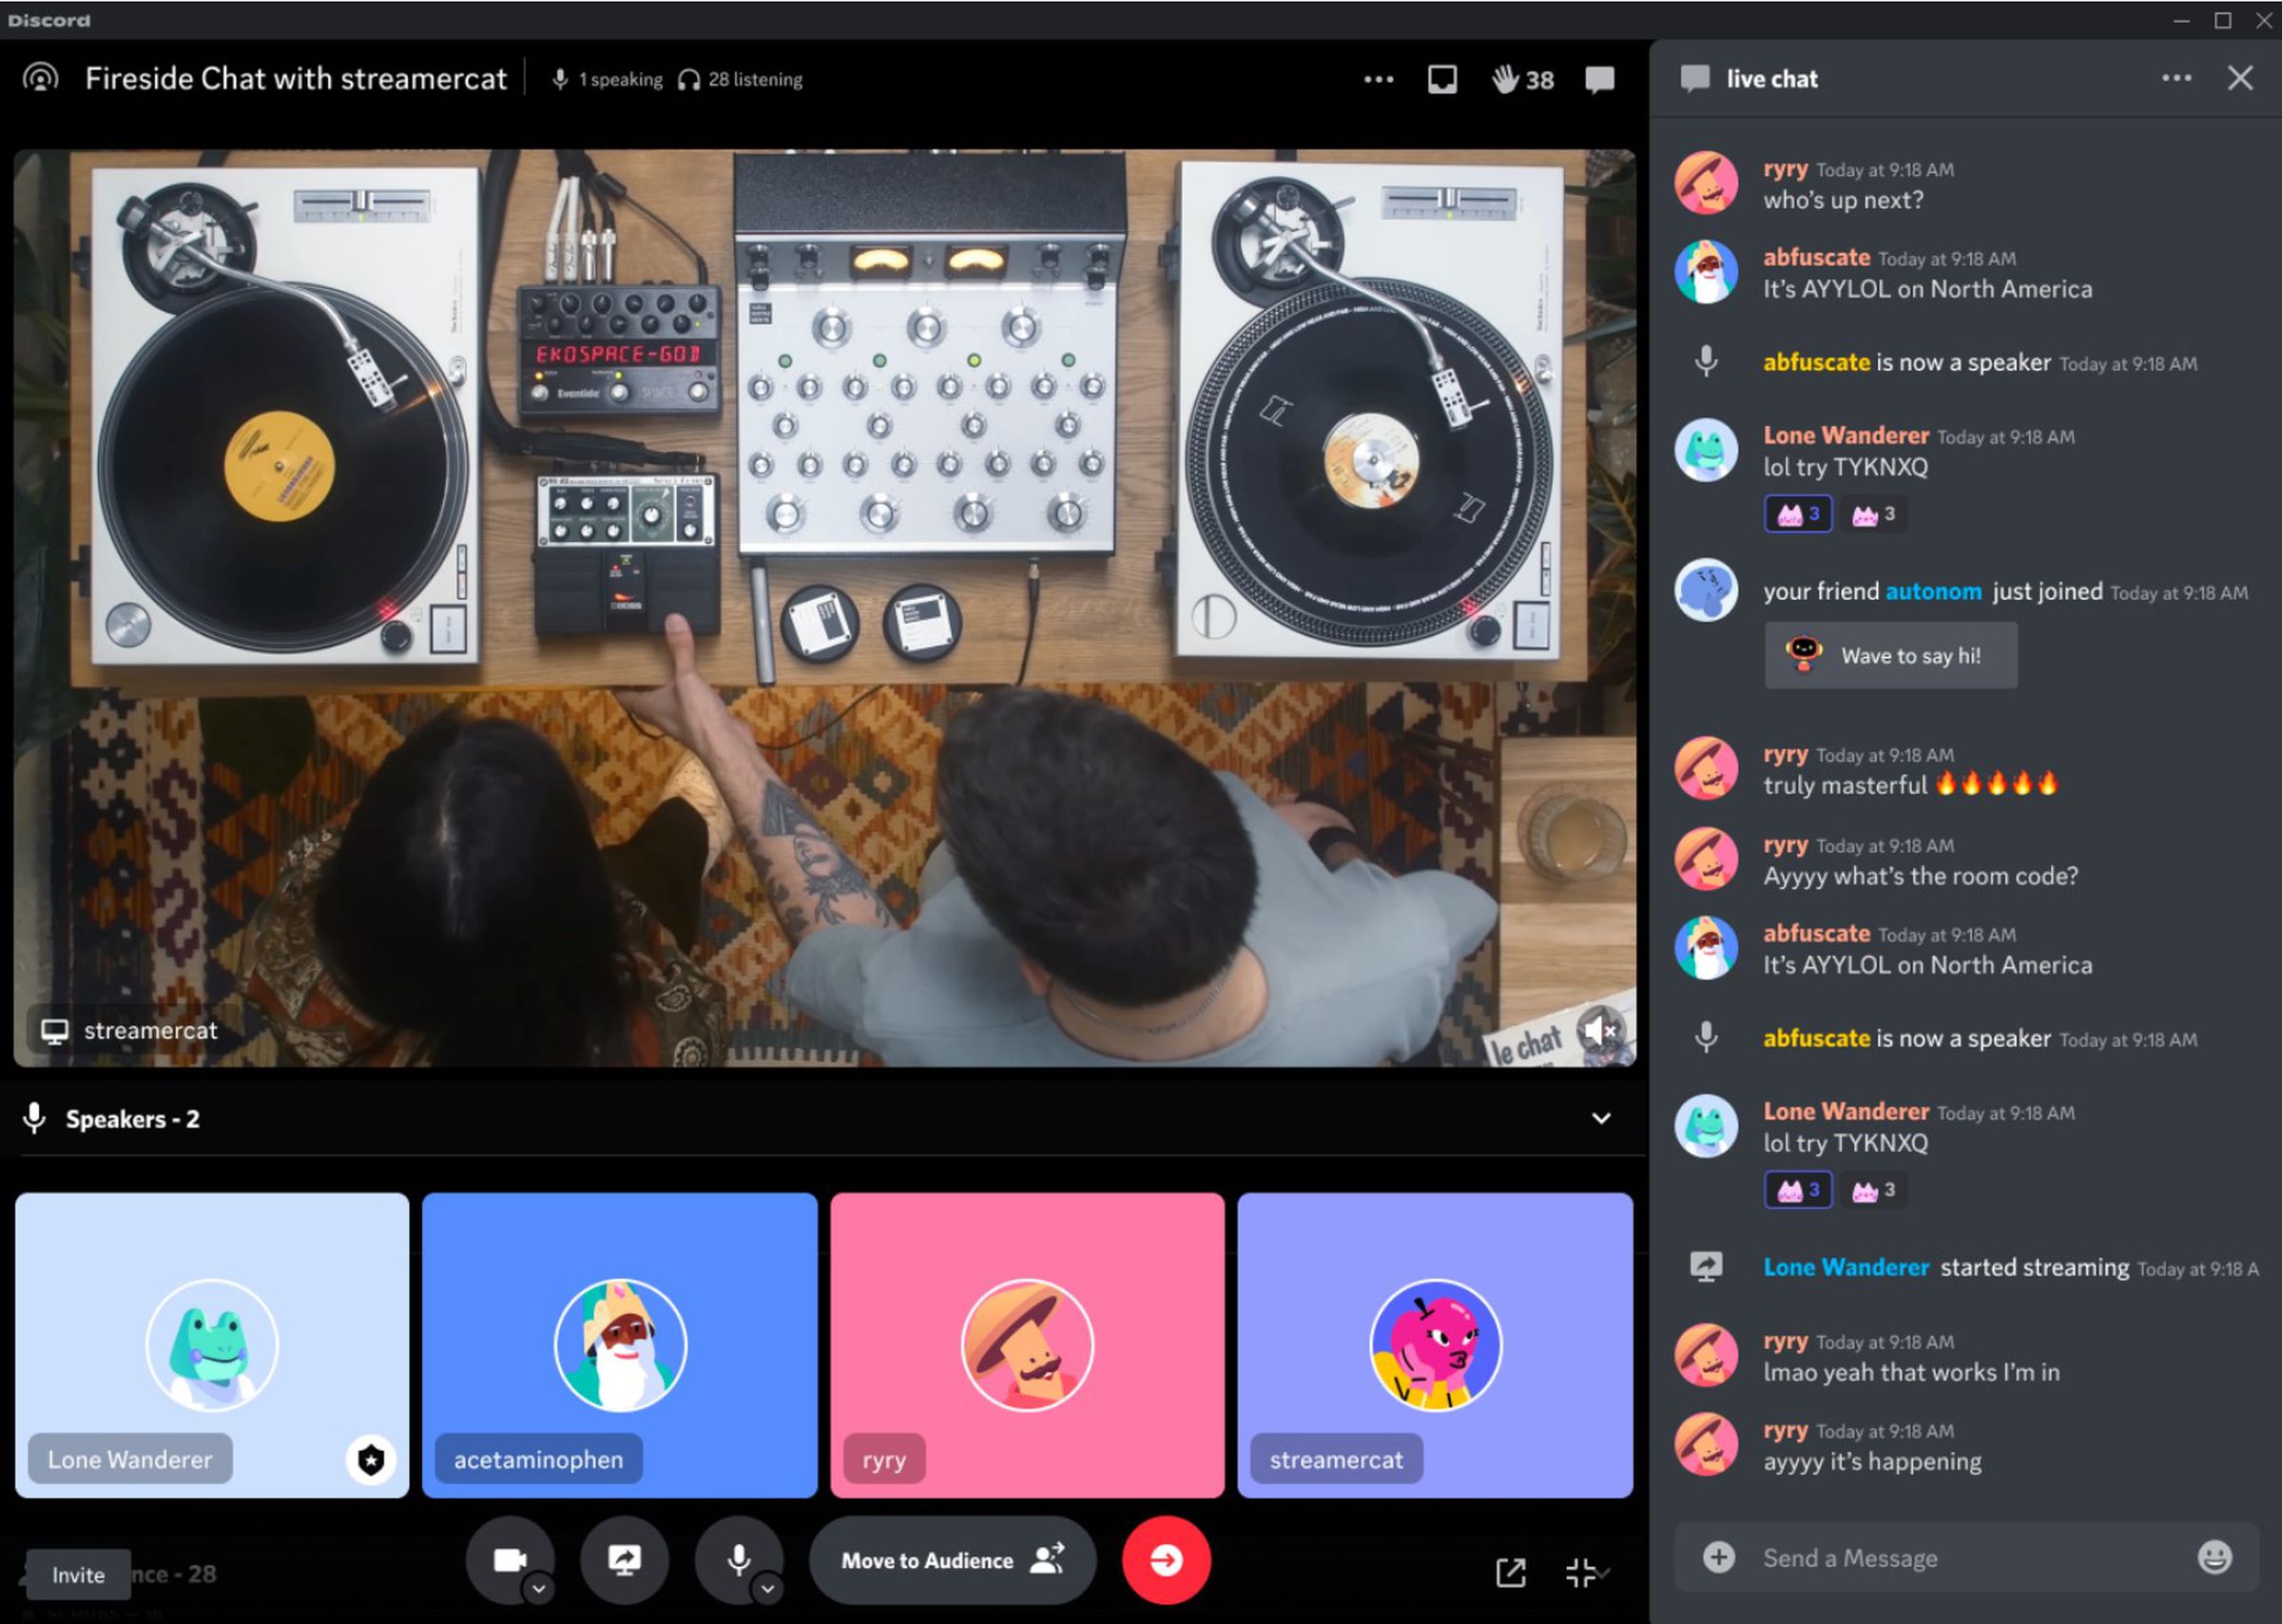 A livestream being hosted on a Discord Stage featuring two people mixing music with record players.